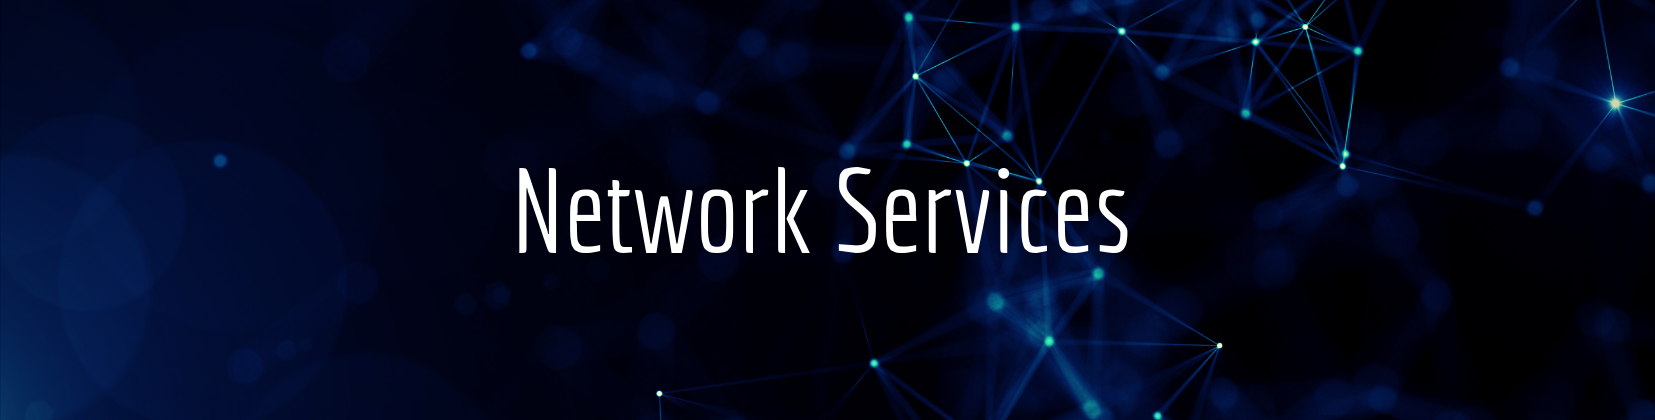 Network Services Banner